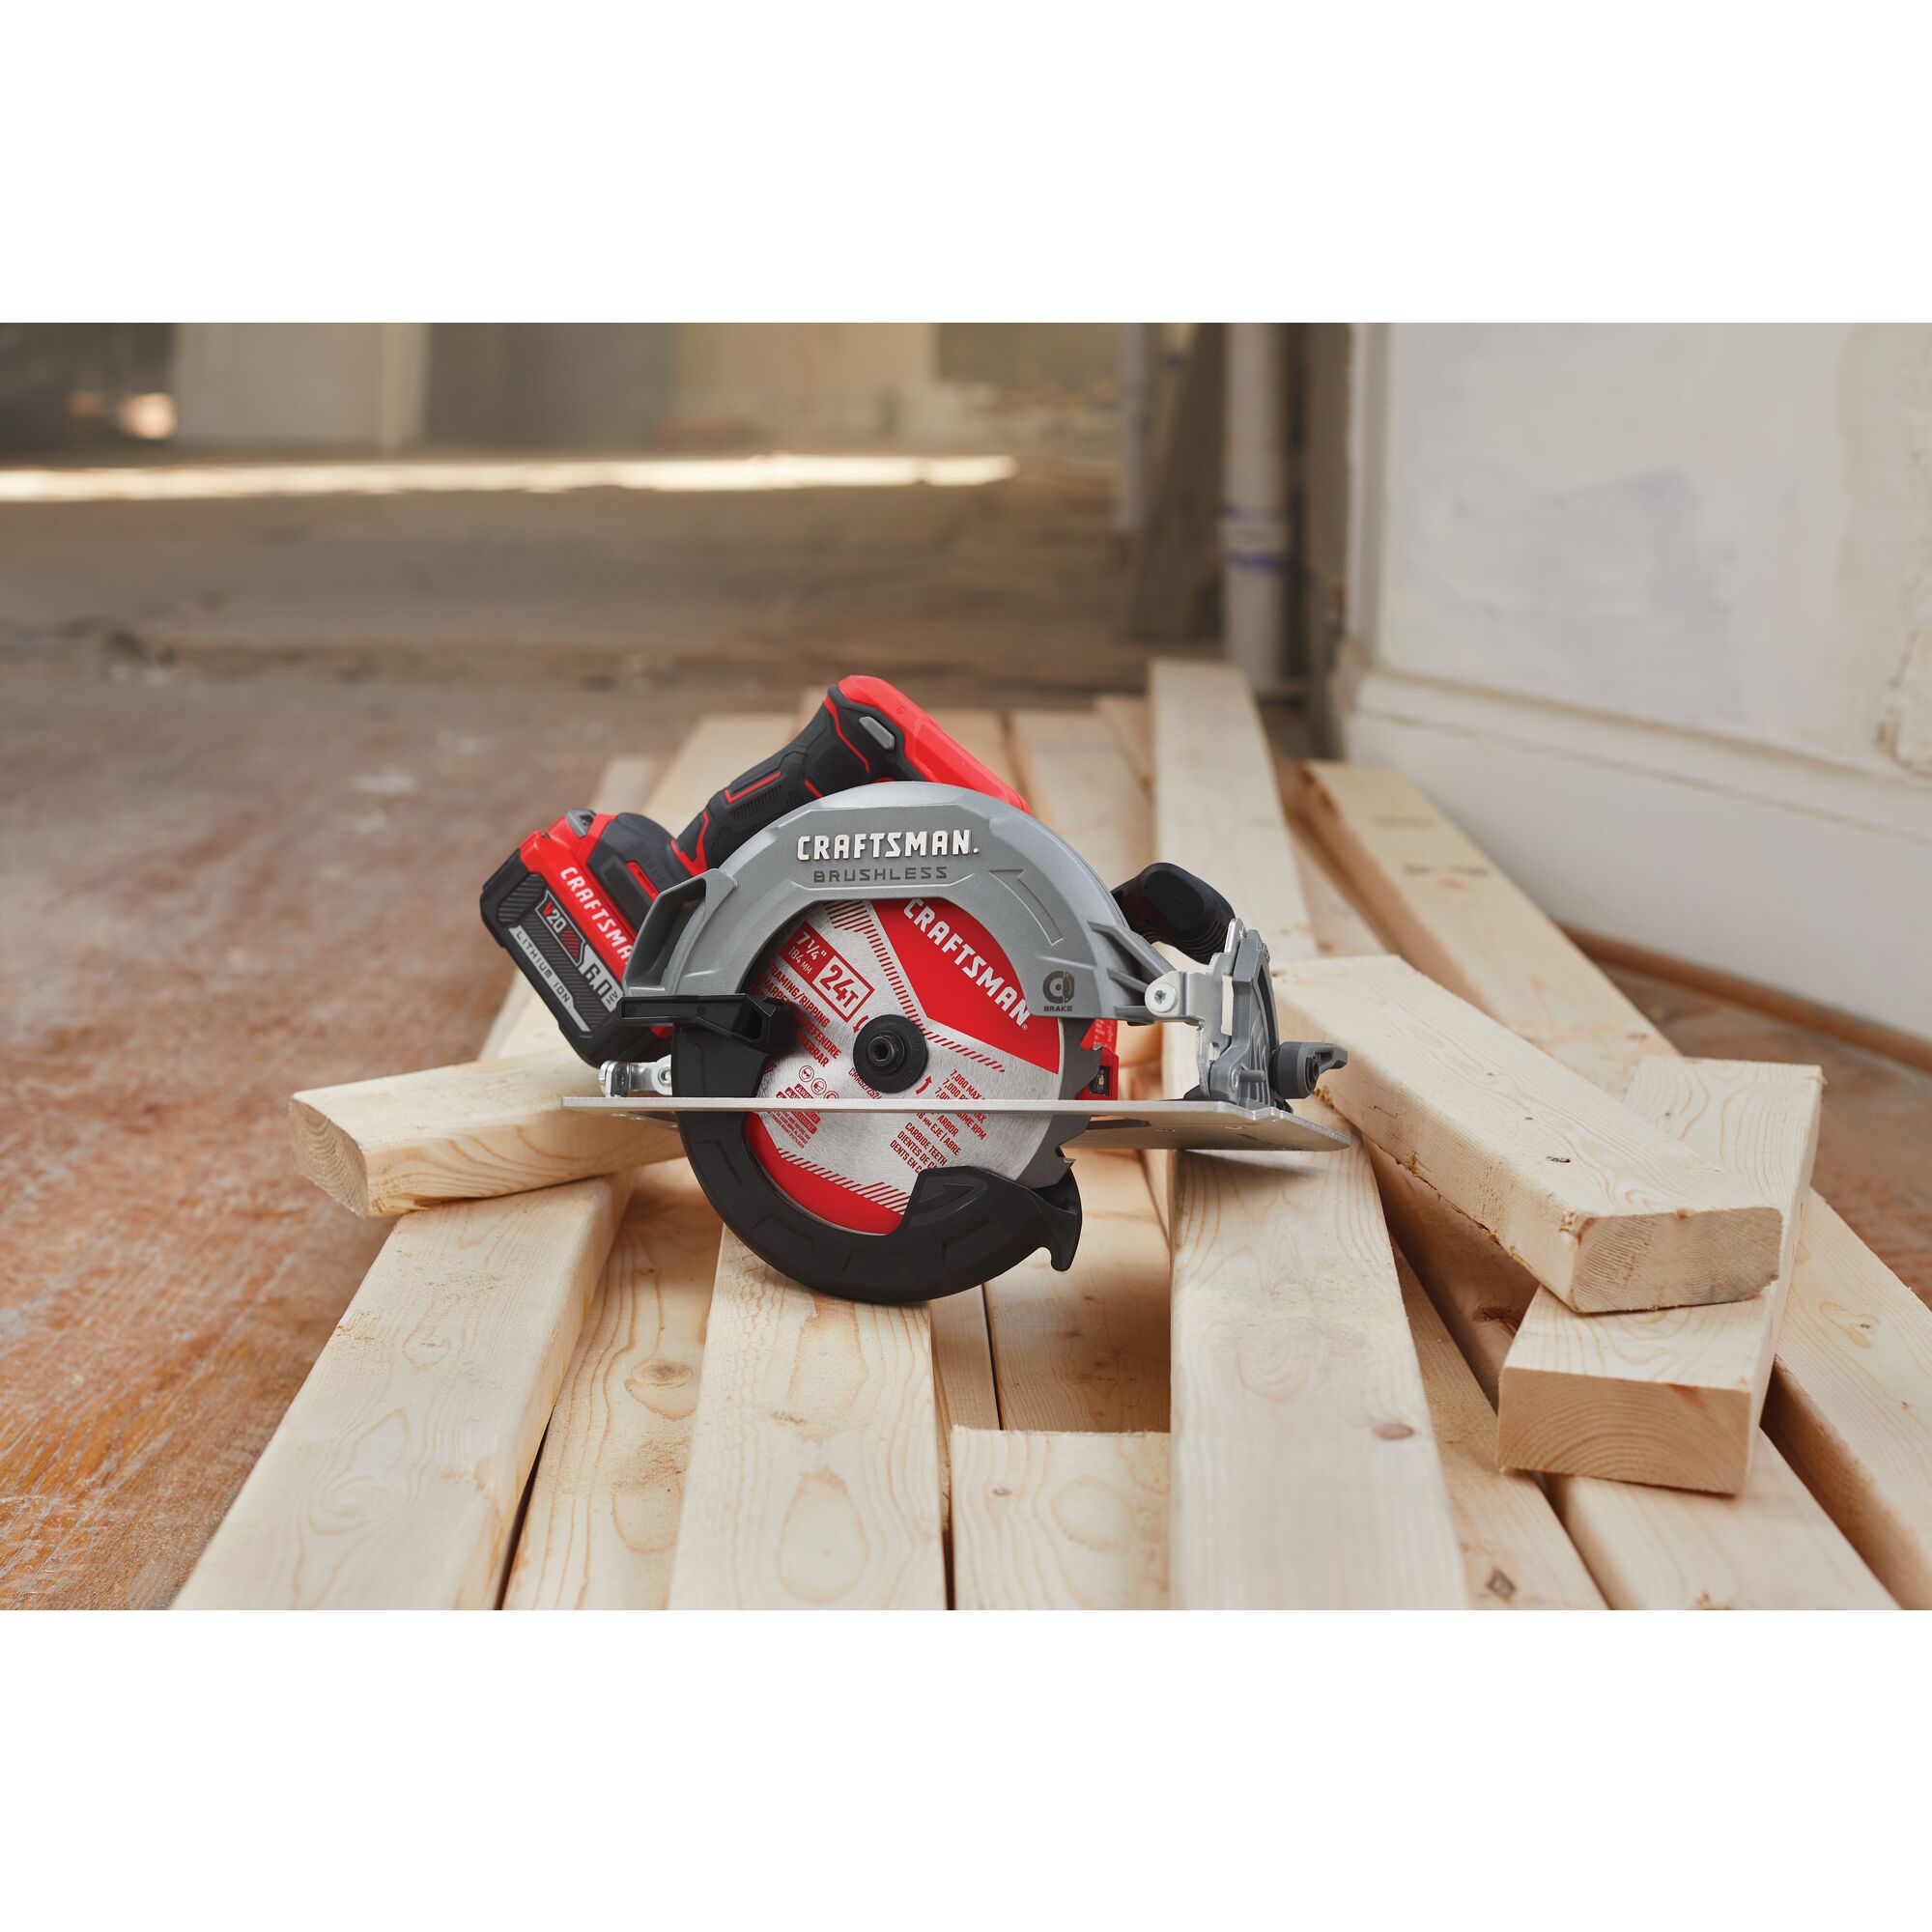 20 volt 7 1 quarter inch brushless cordless circular saw with battery placed on wooden planks.